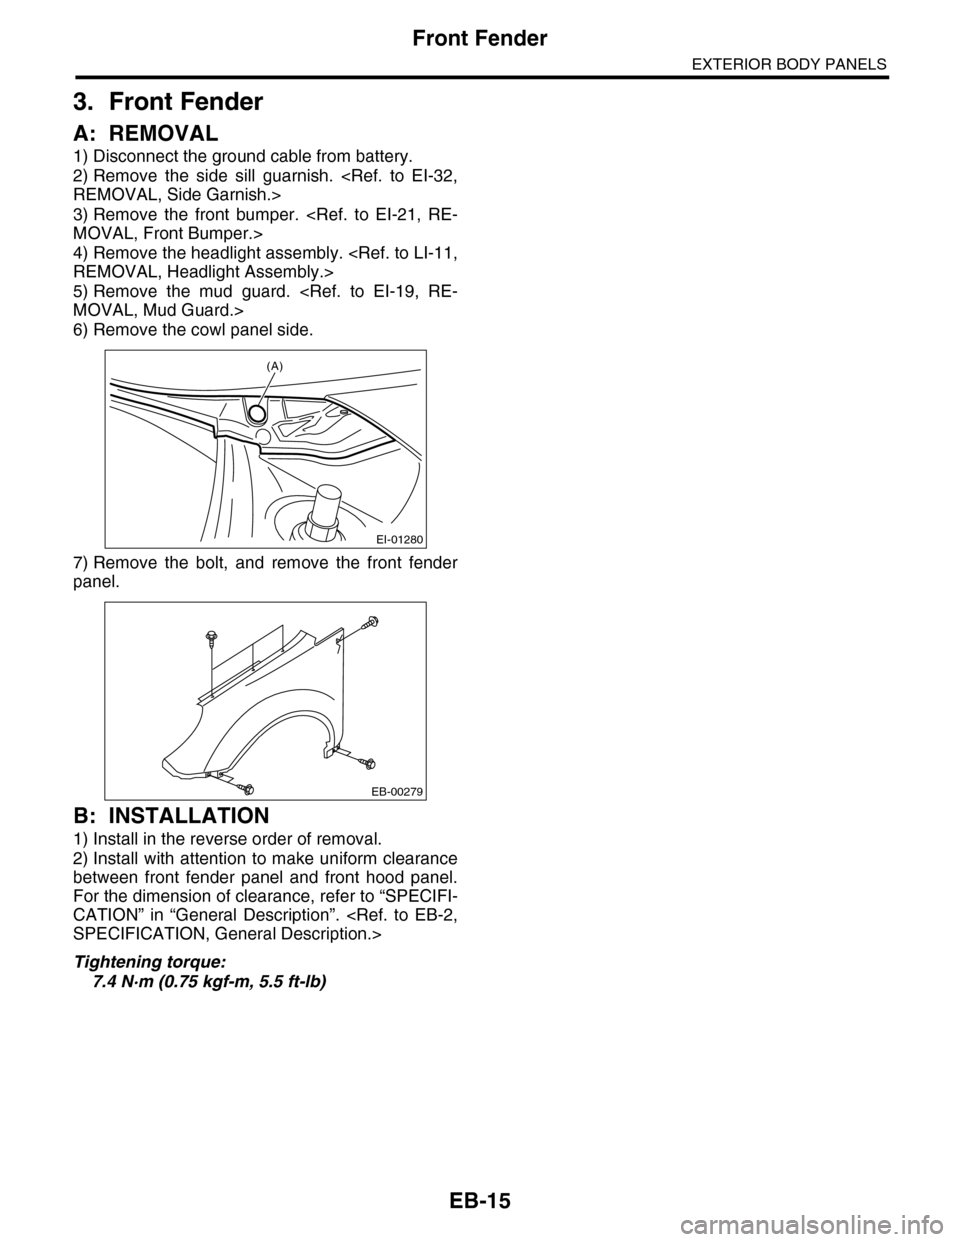 SUBARU TRIBECA 2009 1.G Service Workshop Manual EB-15
Front Fender
EXTERIOR BODY PANELS
3. Front Fender
A: REMOVAL
1) Disconnect the ground cable from battery.
2) Remove  the  side  sill  guarnish.  <Ref.  to  EI-32,
REMOVAL, Side Garnish.>
3) Remo